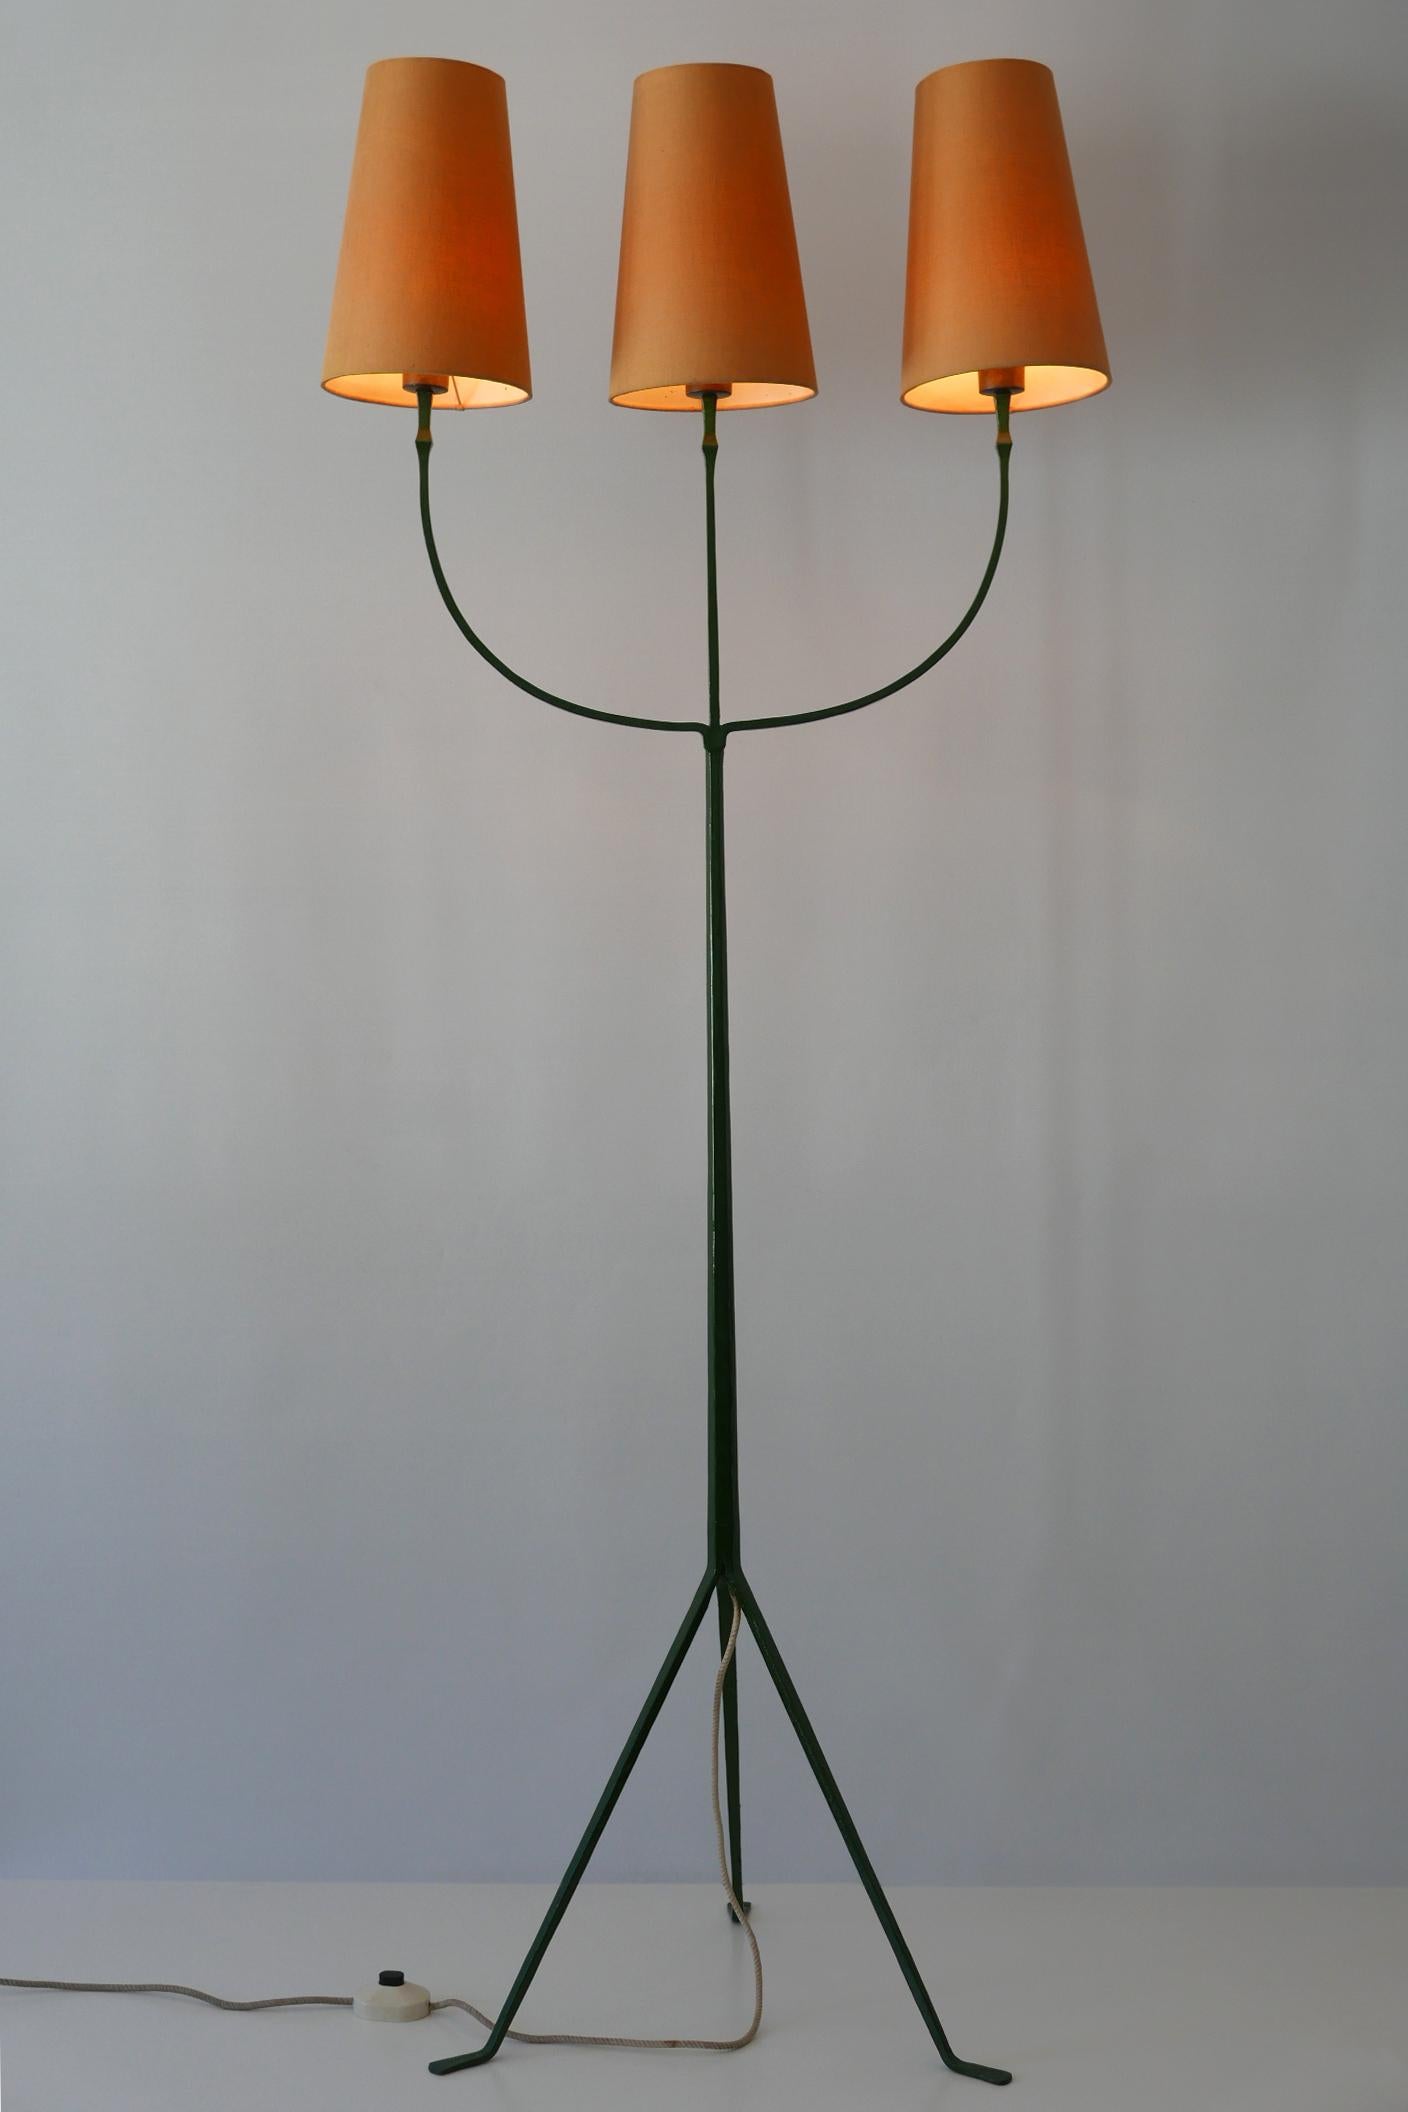 Exceptional and elegant three-flamed Mid-Century Modern floor lamp. Manufactured probably in France, 1950s.

Executed in dark green enameled wrought iron and brass, the lamp needs 3 x E27 / E 26 Edison screw fit bulbs, is wired, and in working